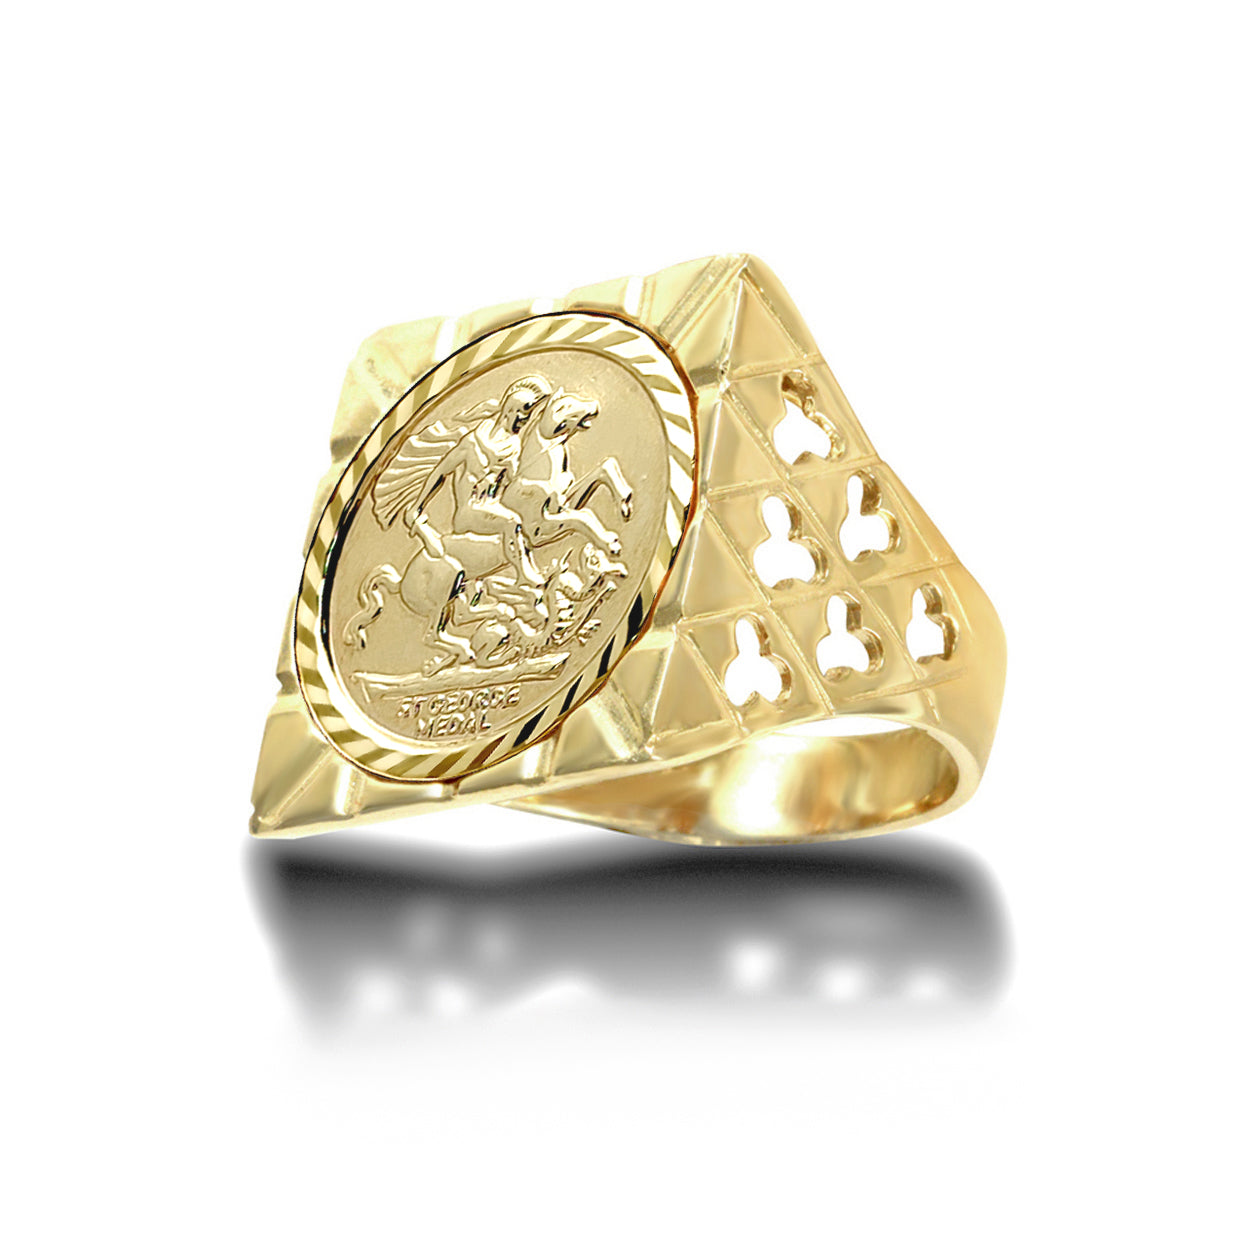 9ct Gold  Clubs Clovers Square Top St George Ring (Half Sov Size) - JRN178-H